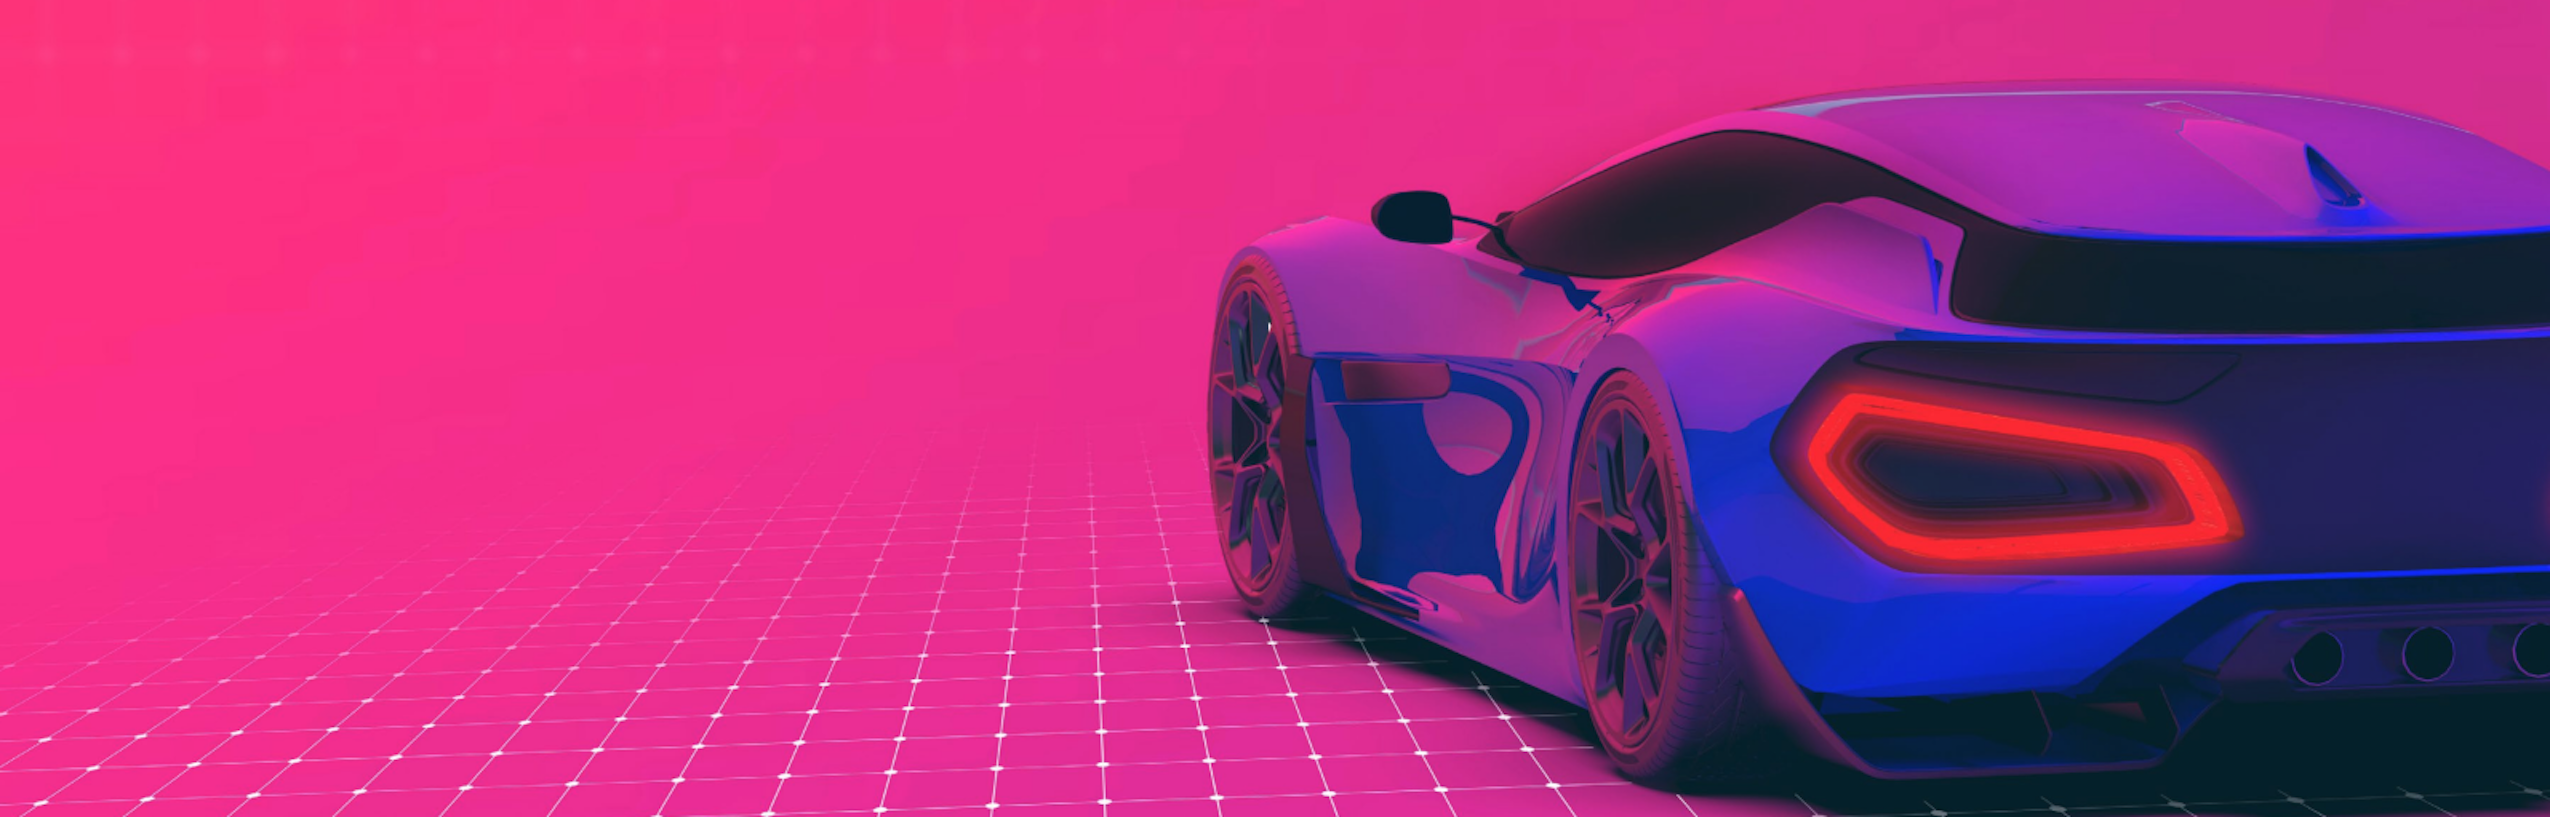 Sportscar from the back with pink background